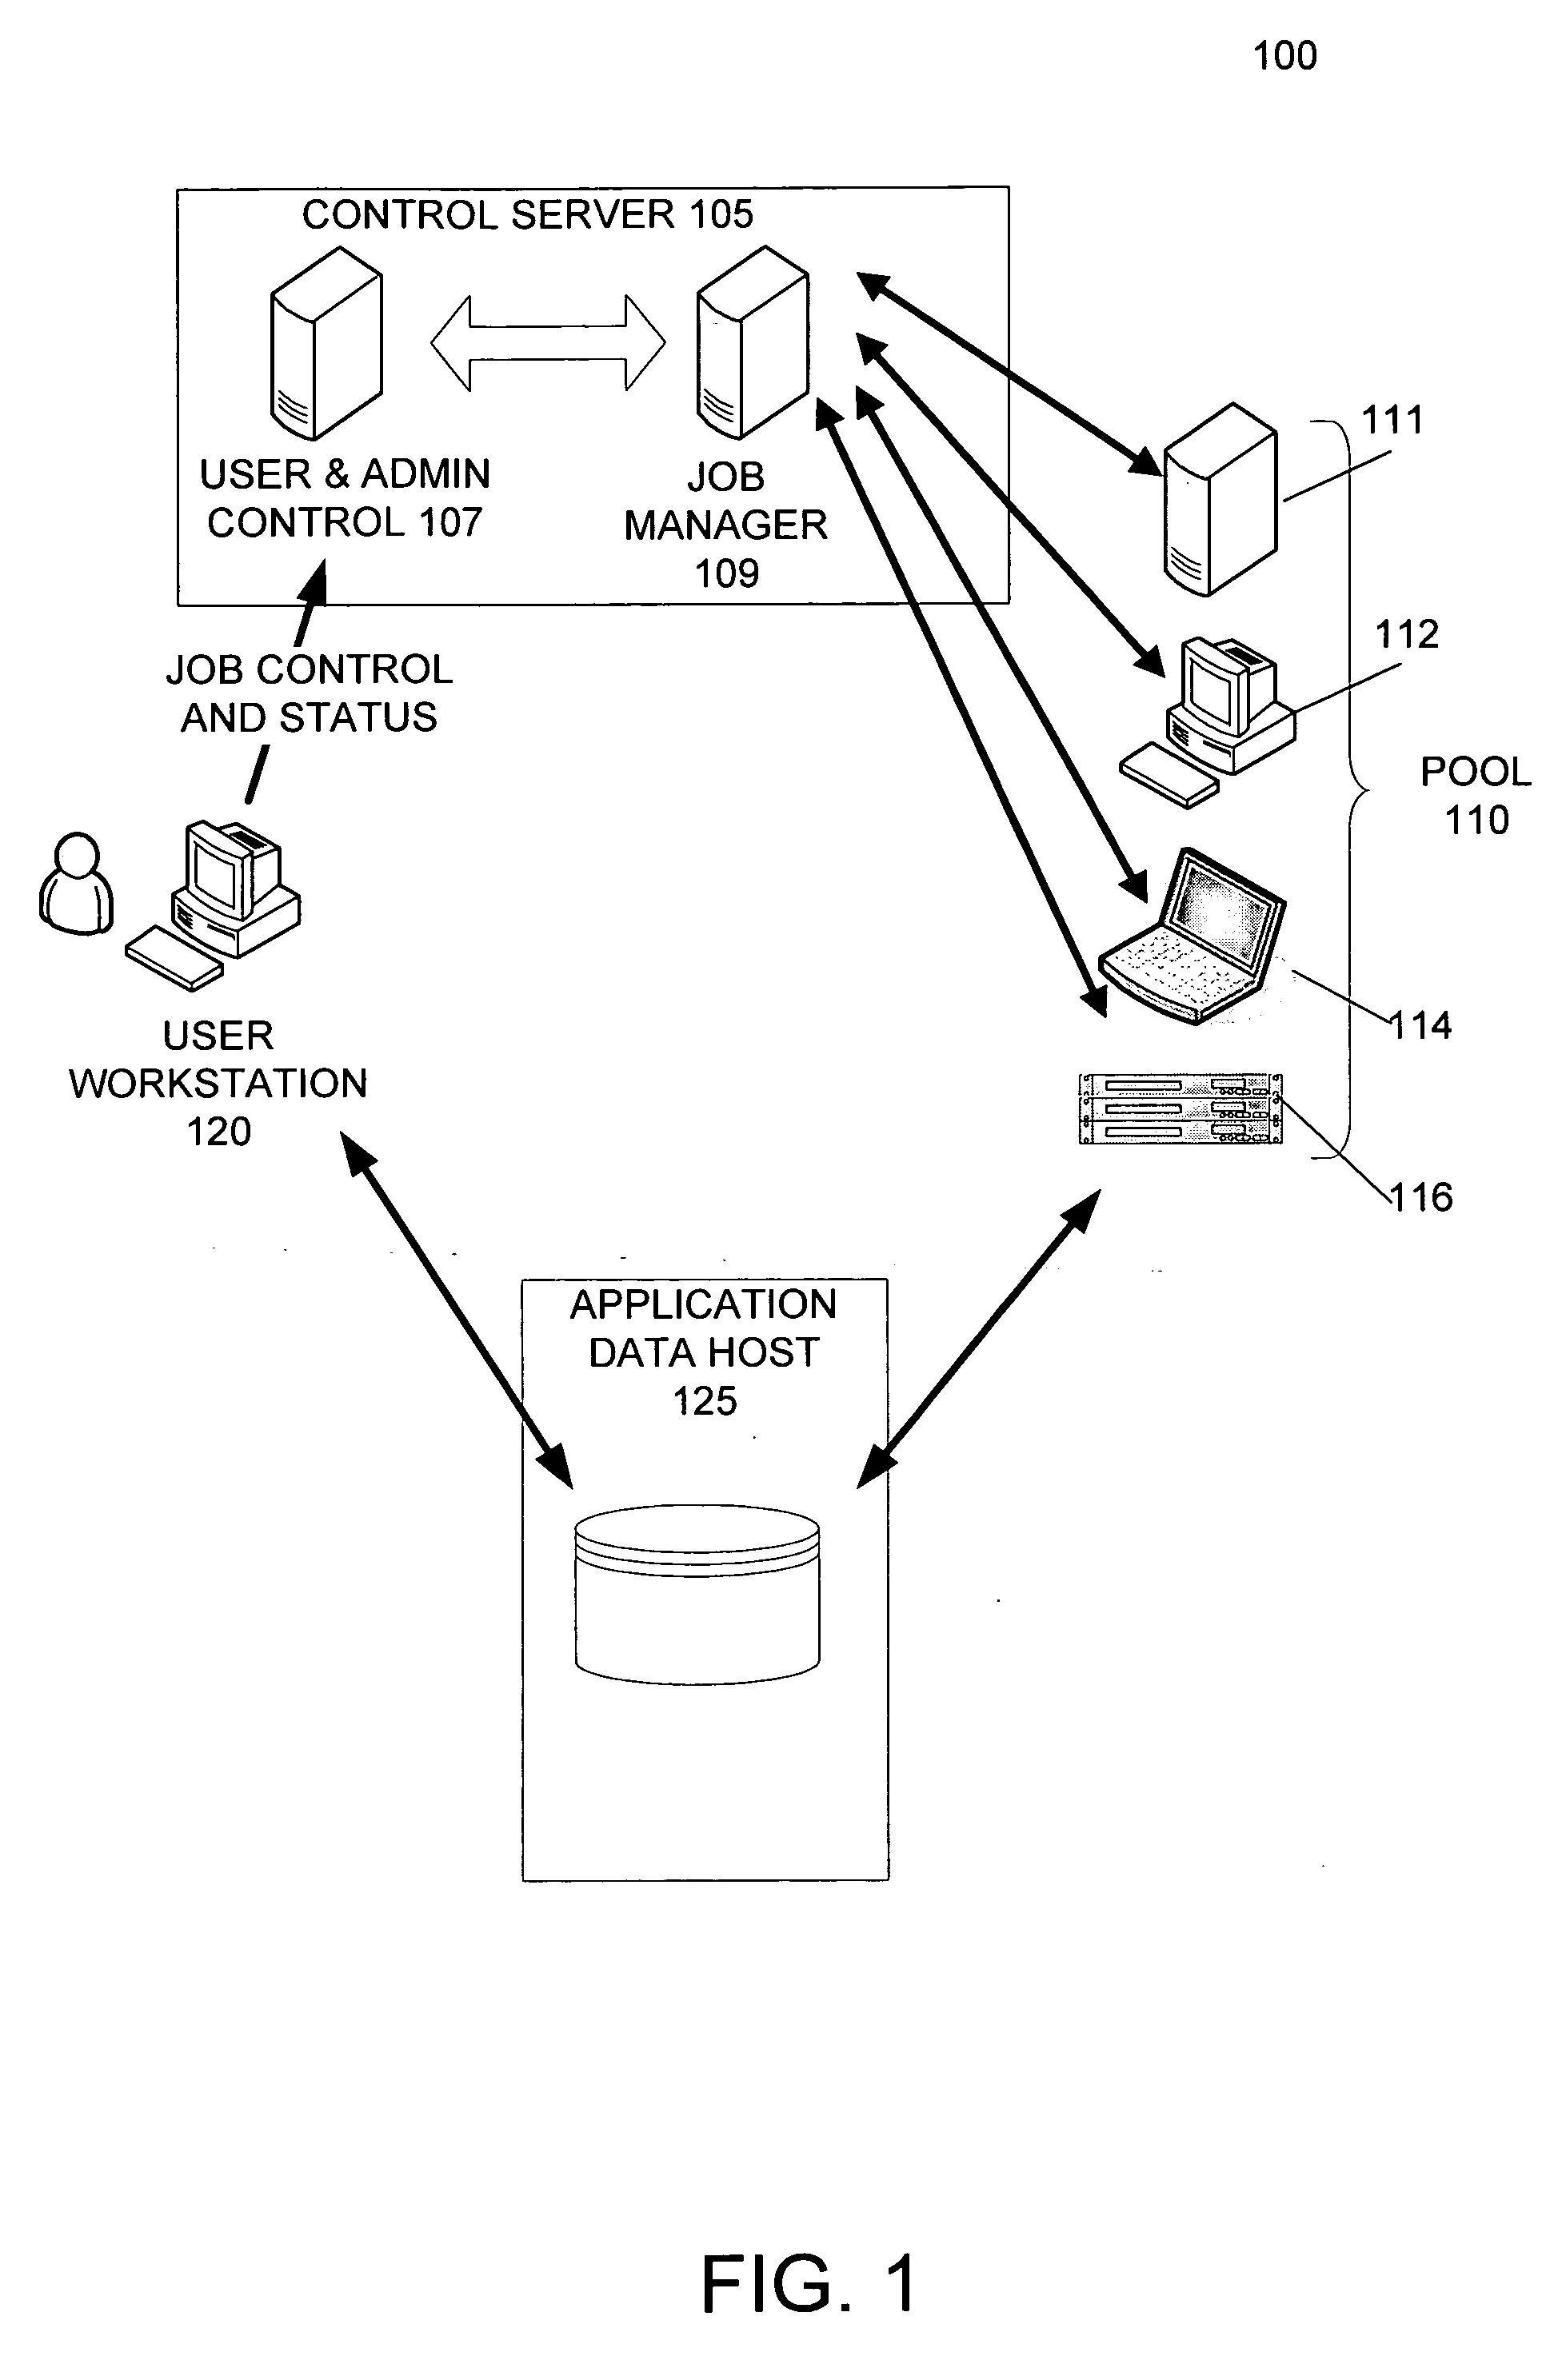 Distributed object execution system